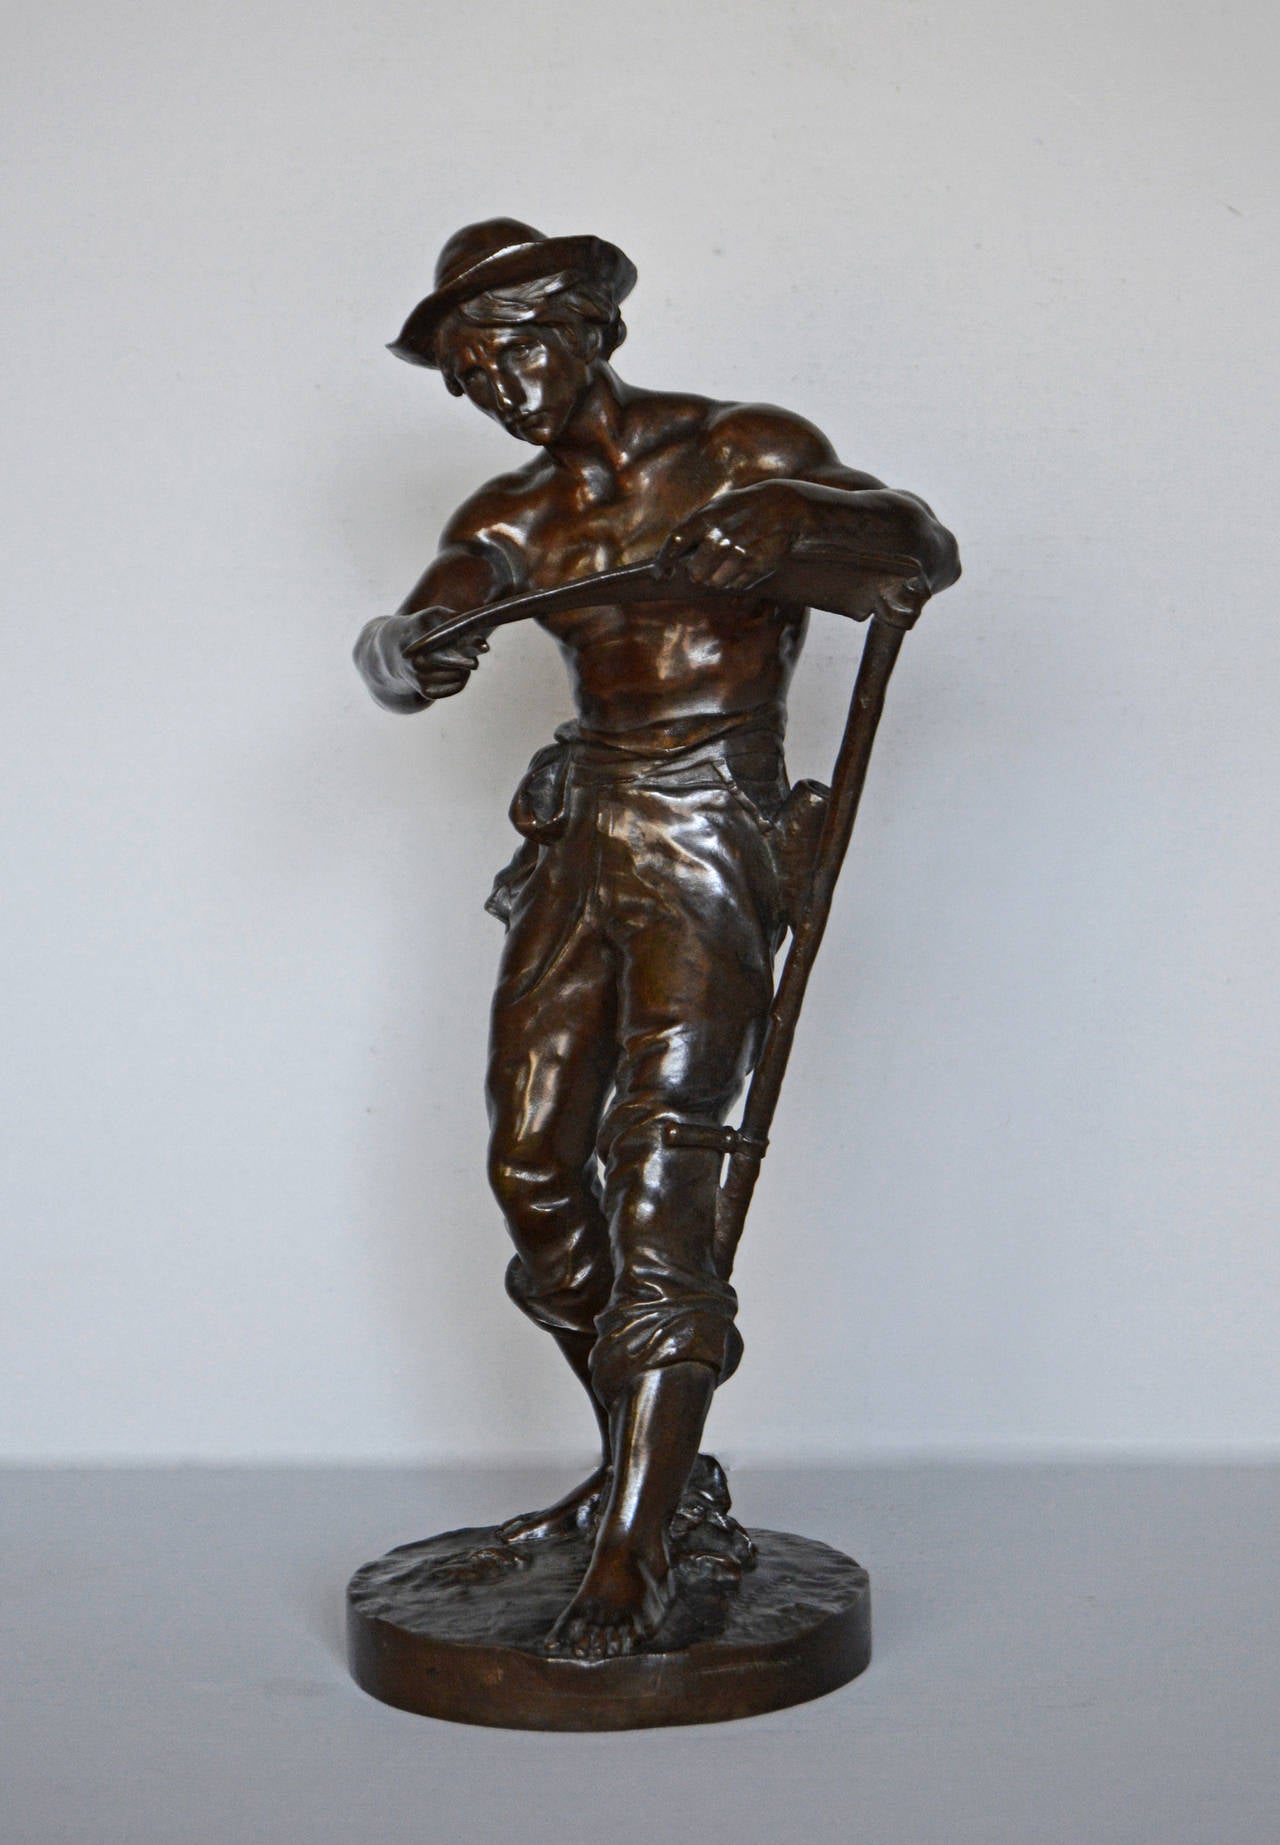 Jean Gautherin 
French, (1840-1890)
Le Faucheur 
Bronze, signed
Height: 13½ inches

Bronze sculpture of a farmer sharpening his scythe by Jean Gautherin, signed 'J Gautherin'.

Jean Gautherin was born in Savault a hamlet of the